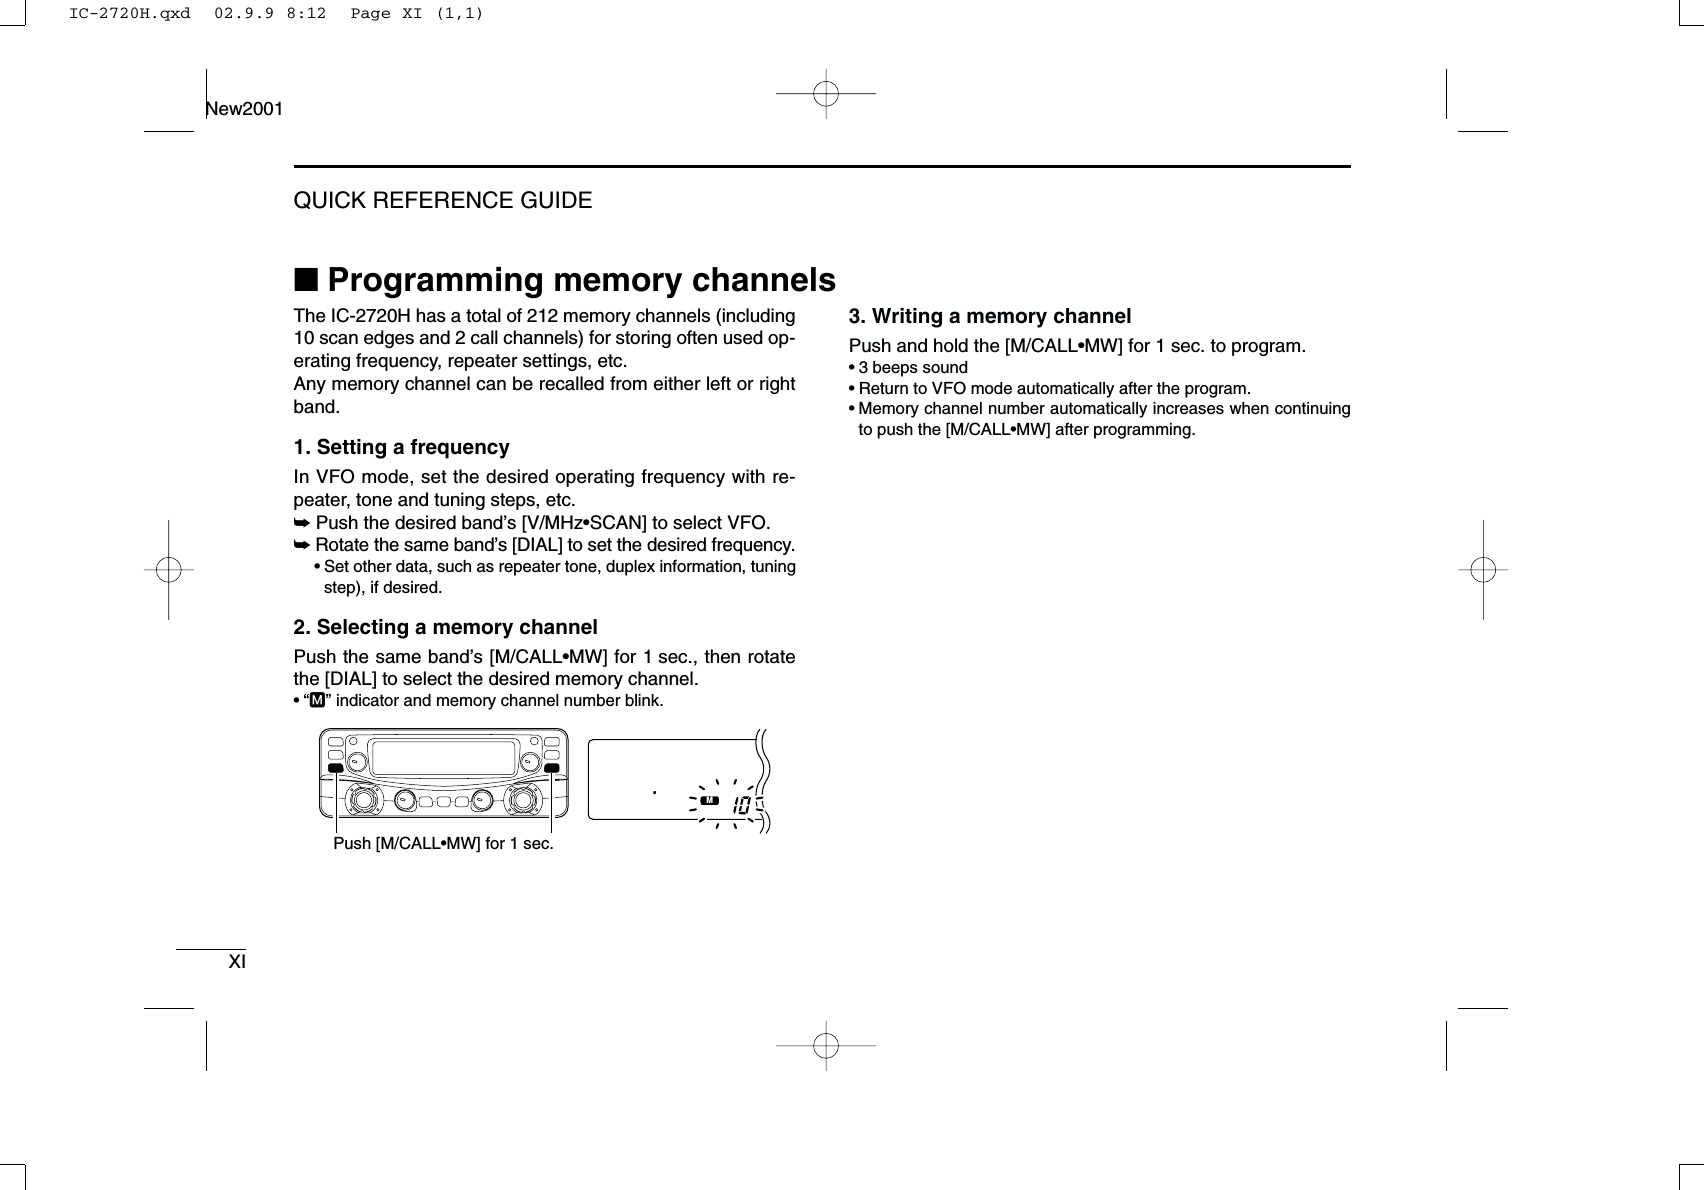 XIQUICK REFERENCE GUIDENew2001■Programming memory channelsThe IC-2720H has a total of 212 memory channels (including10 scan edges and 2 call channels) for storing often used op-erating frequency, repeater settings, etc. Any memory channel can be recalled from either left or rightband.1. Setting a frequencyIn VFO mode, set the desired operating frequency with re-peater, tone and tuning steps, etc. ➥Push the desired band’s [V/MHz•SCAN] to select VFO.➥Rotate the same band’s [DIAL] to set the desired frequency.•Set other data, such as repeater tone, duplex information, tuningstep), if desired.2. Selecting a memory channel Push the same band’s [M/CALL•MW] for 1 sec., then rotatethe [DIAL] to select the desired memory channel.•“M” indicator and memory channel number blink.3. Writing a memory channelPush and hold the [M/CALL•MW] for 1 sec. to program.•3 beeps sound•Return to VFO mode automatically after the program.•Memory channel number automatically increases when continuingto push the [M/CALL•MW] after programming.MAINT  XMPush [M/CALL•MW] for 1 sec.IC-2720H.qxd  02.9.9 8:12  Page XI (1,1)